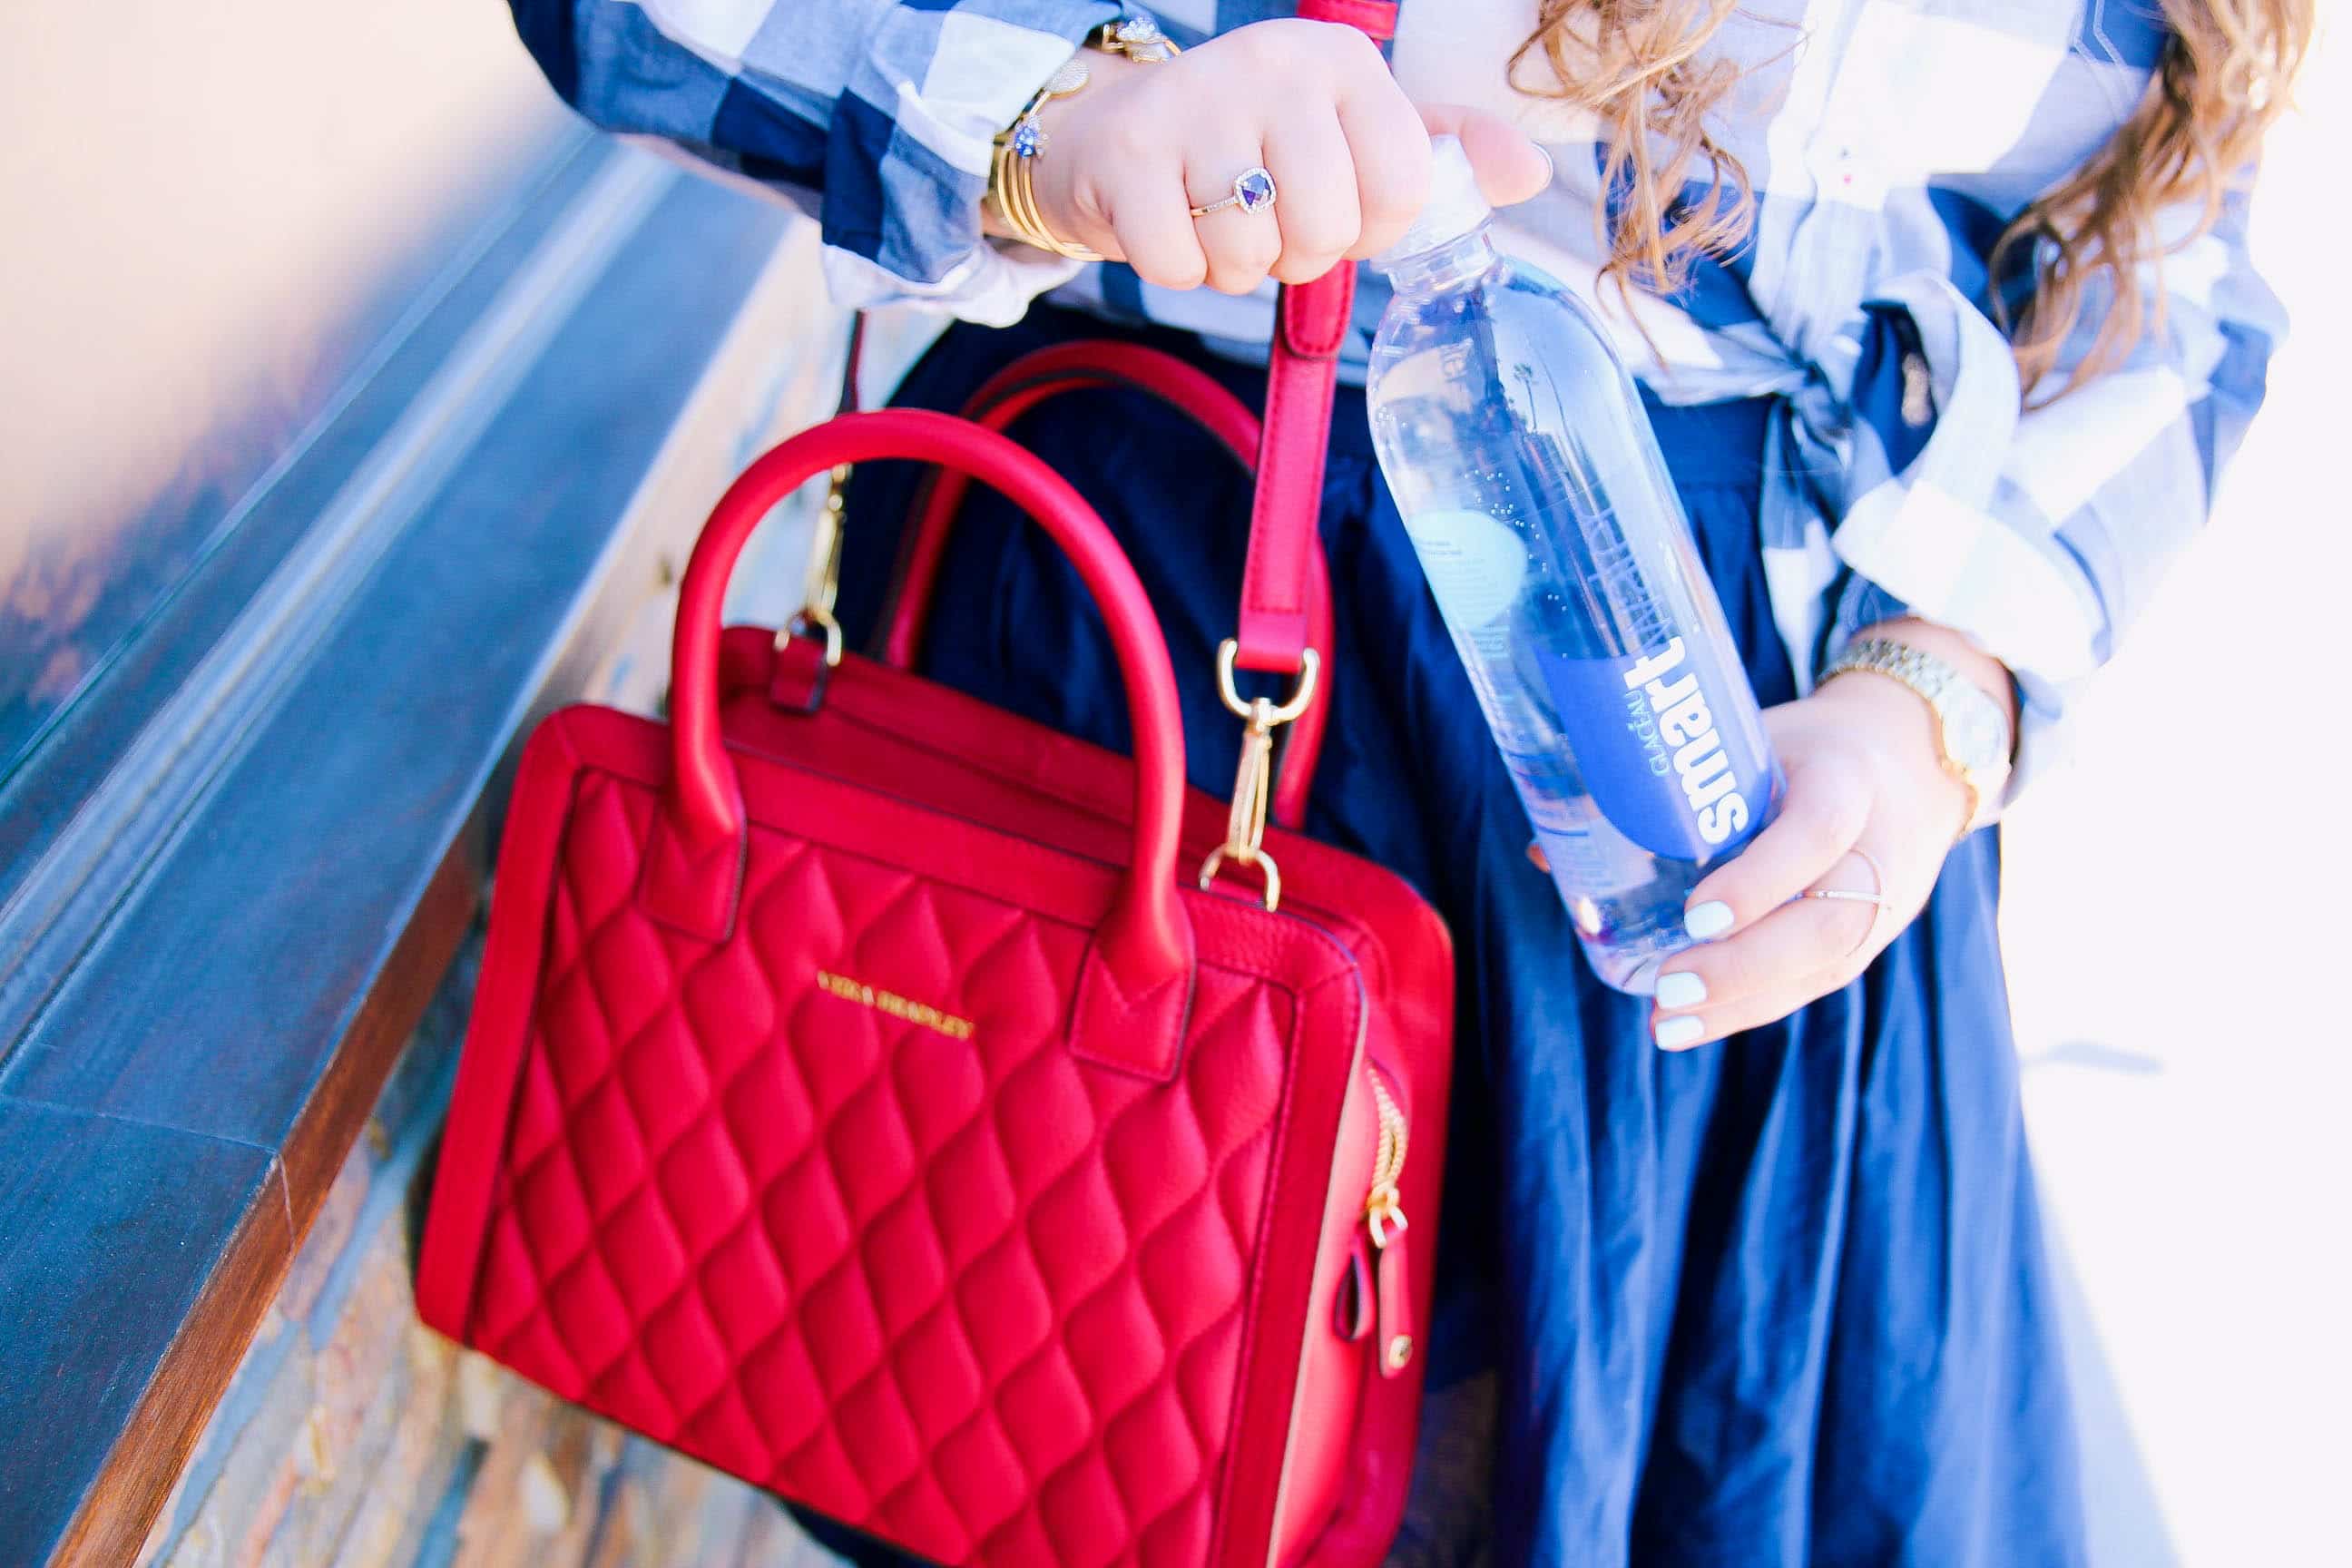 missyonmadison, melissa tierney, smartwater, spring style, hydration, how to stay hydrated, spring fitness, spring wellness, how to stay healthy this spring, target, smartwater at target, la blogger, fashion blogger, lifestyle blogger, flatlay, what's in my bag, 